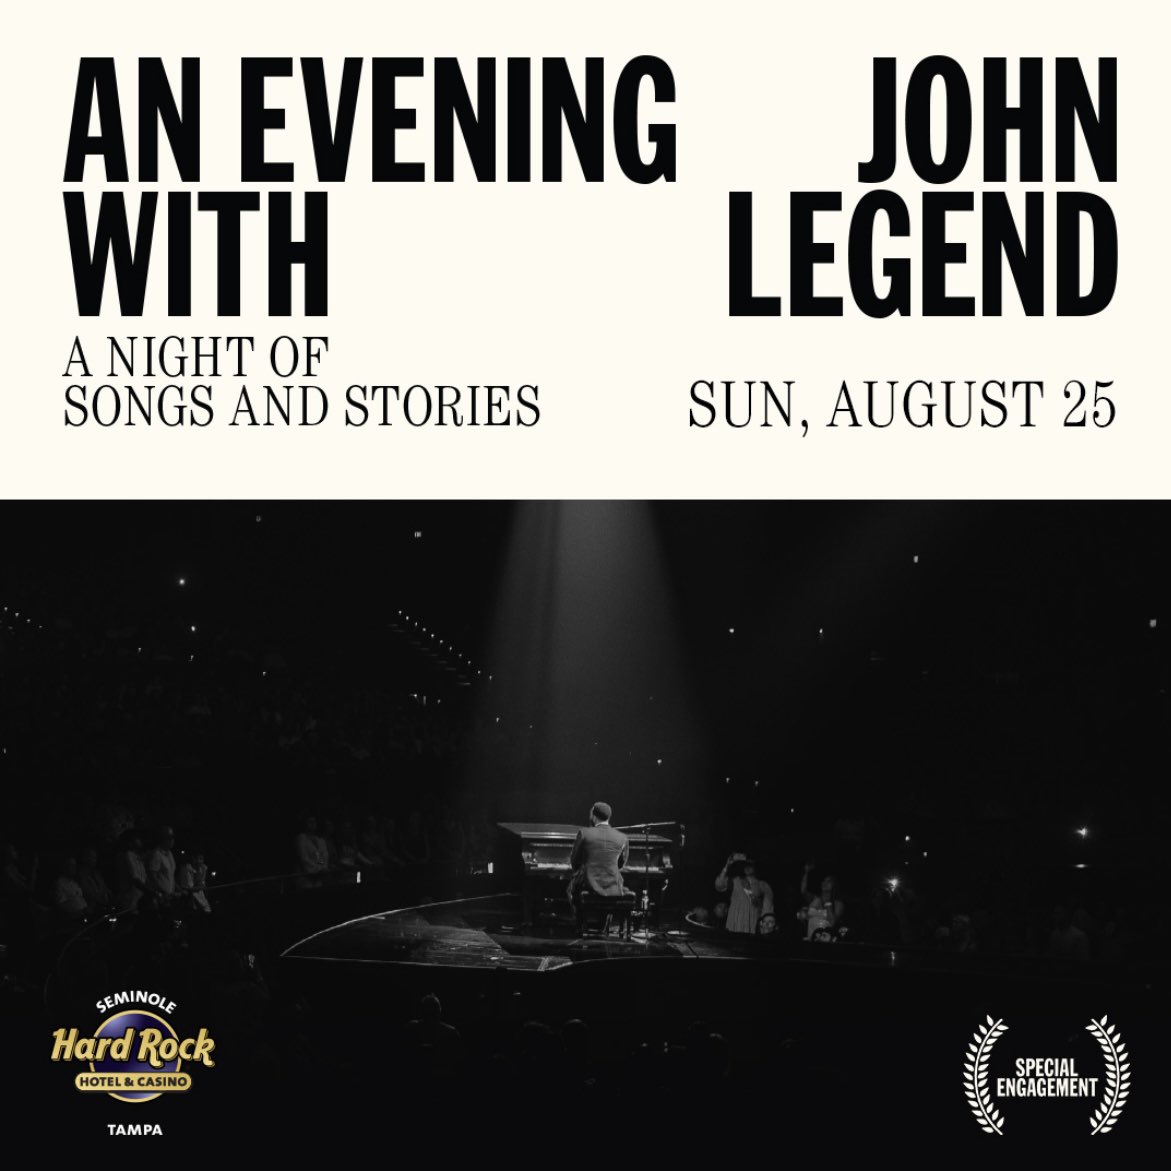 🚨JUST ANNOUNCED🚨 John Legend is returning to the Hard Rock Tampa stage on Sunday, August 25!

Social media presale is happening this Thursday, May 2, at 10AM!
Password | TUNEIN
🔗 Ticket link: tr.ee/HVx85KQkwt

GA tickets go on sale Friday, May 3, at 10AM.